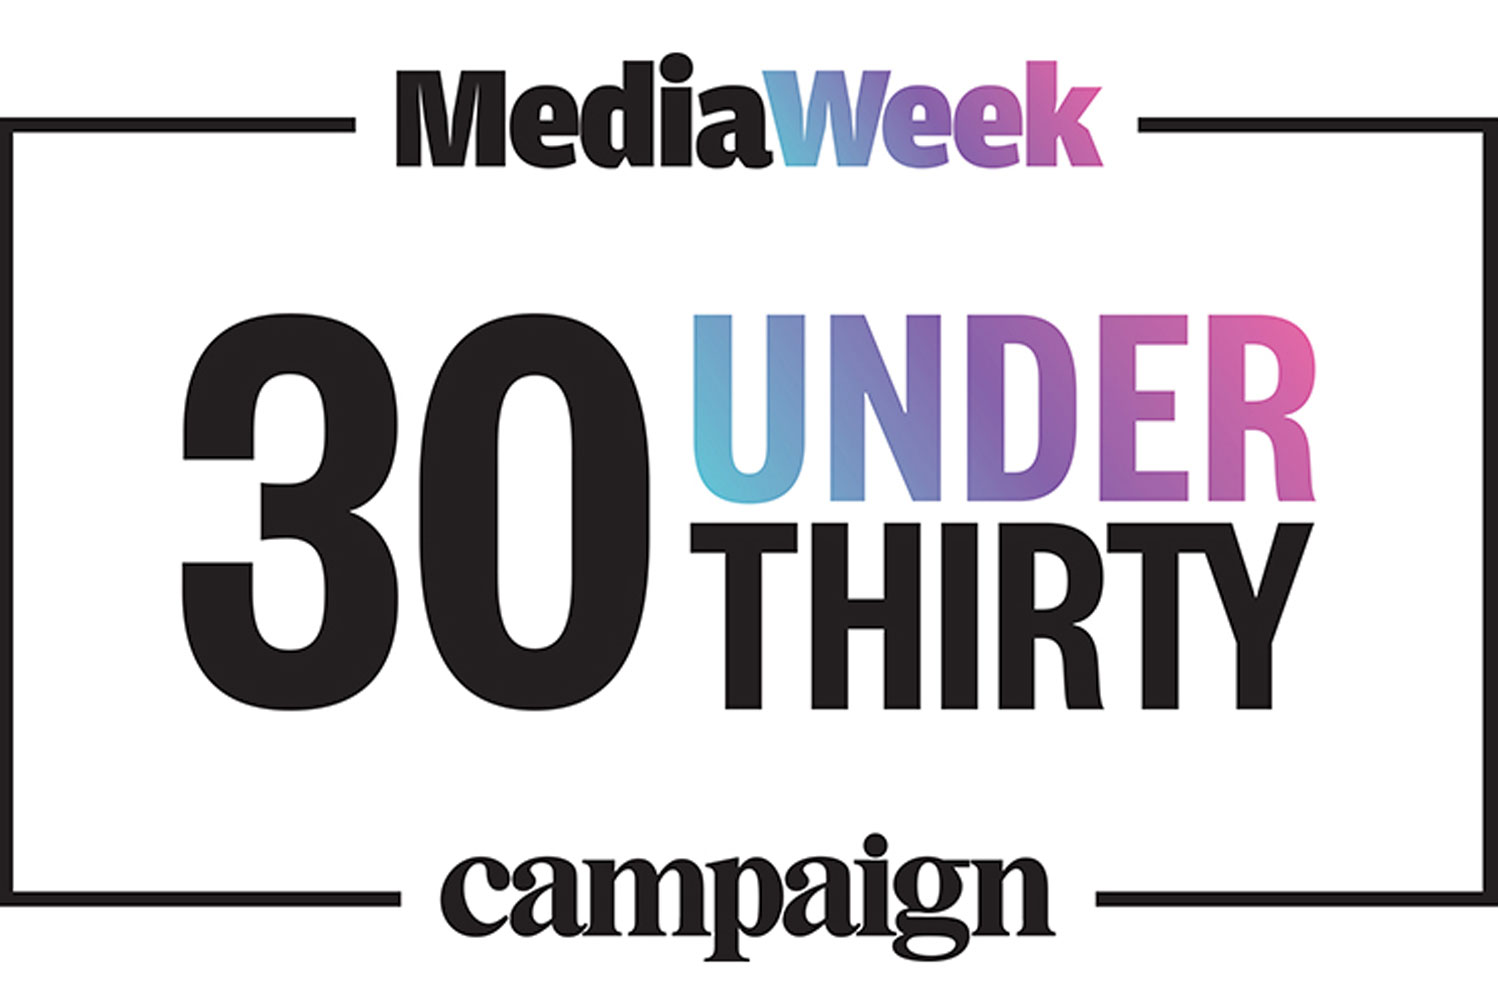 Leaders from OMG’s Named Among Campaign’s 30 Under 30